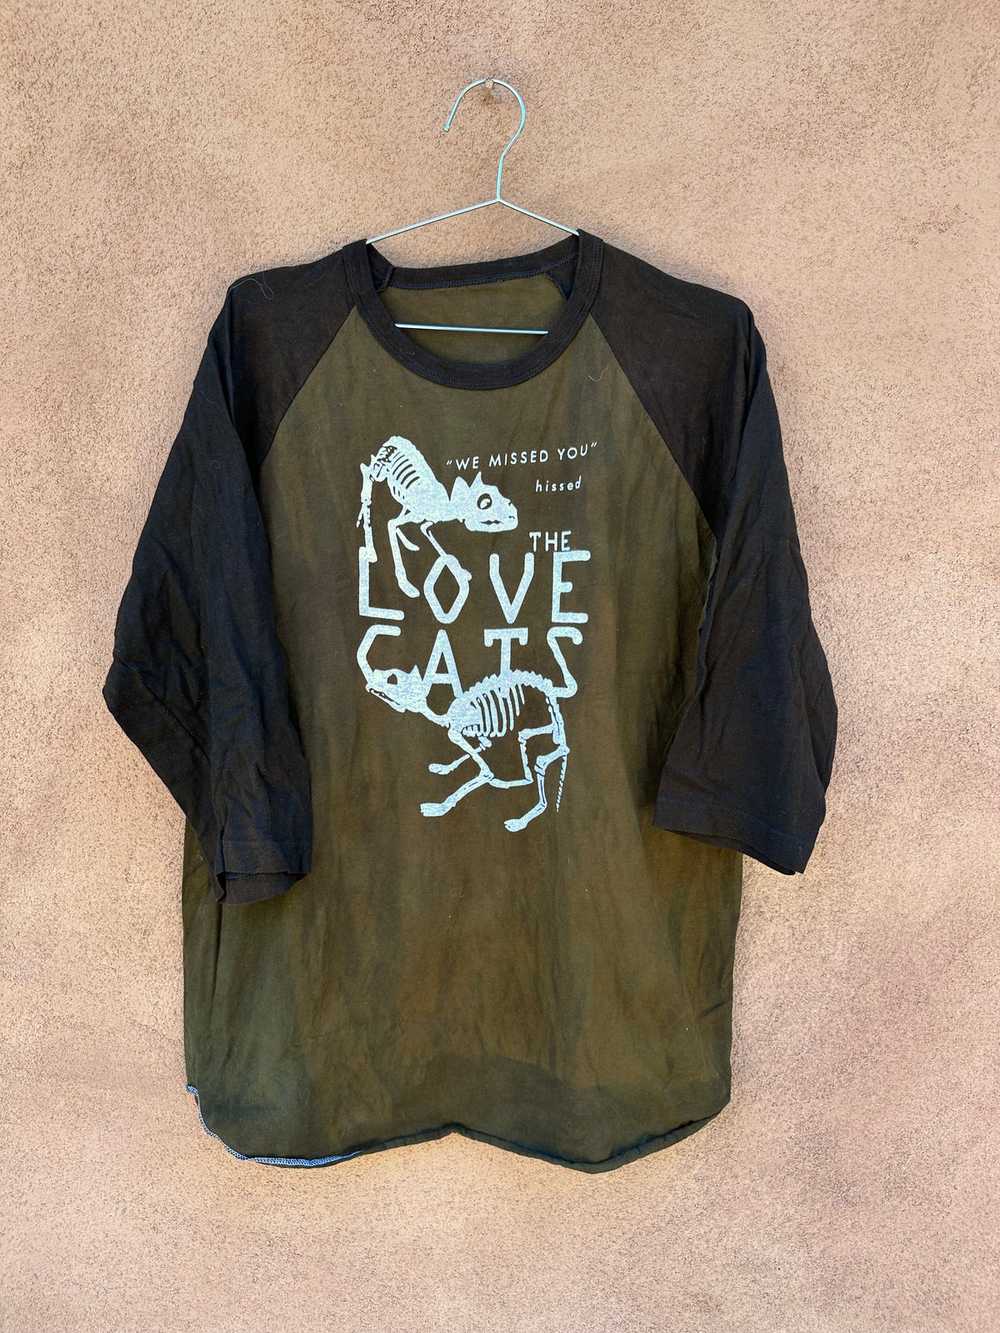 Rare The Cure "The Love Cats" 3/4 Sleeve T-shirt - image 1